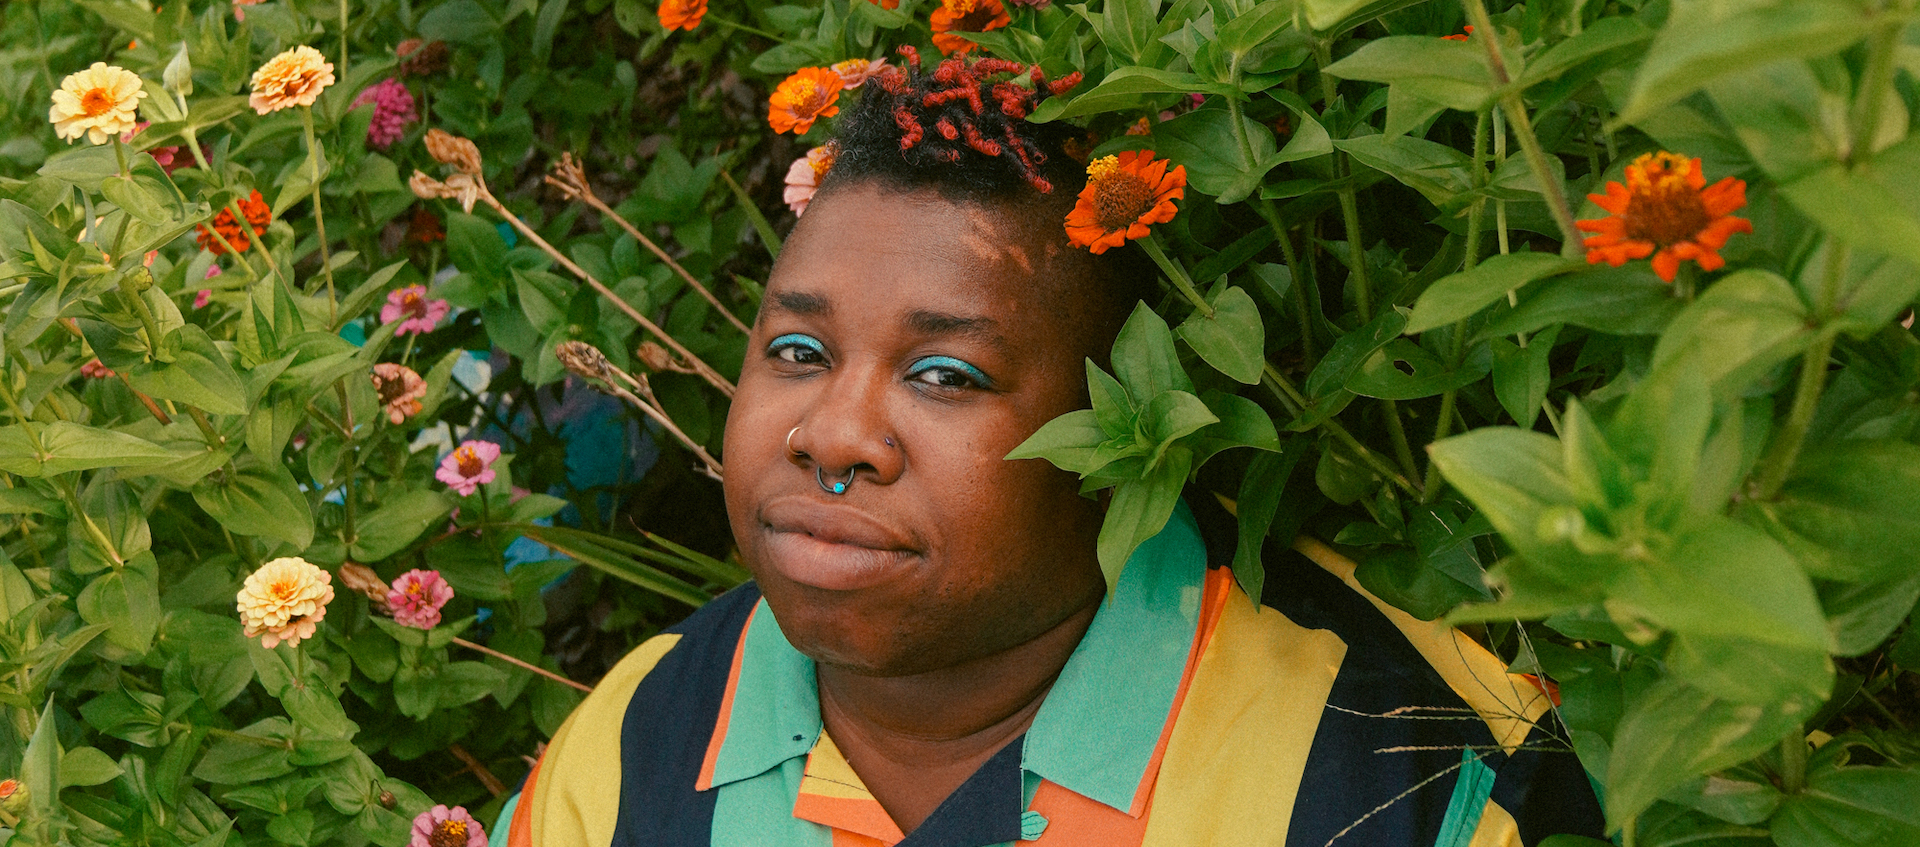 Singer-songwriter Sharon Udoh, wearing a bright collared shirt with vertical stripes, standing nestled in a large bush with orange and yellow flowers